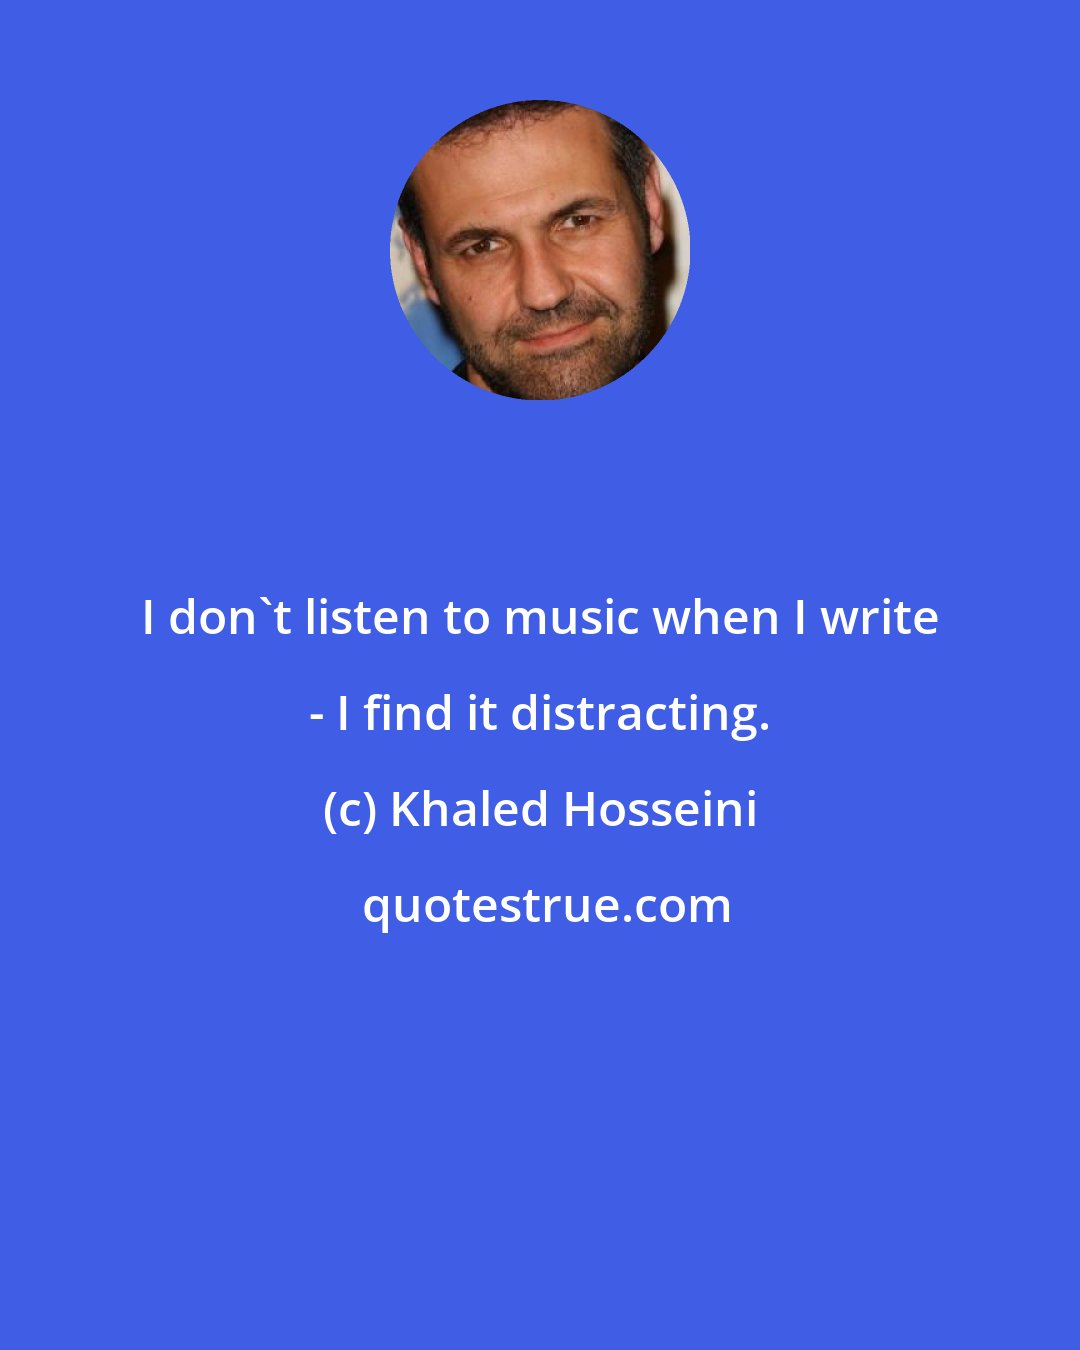 Khaled Hosseini: I don't listen to music when I write - I find it distracting.